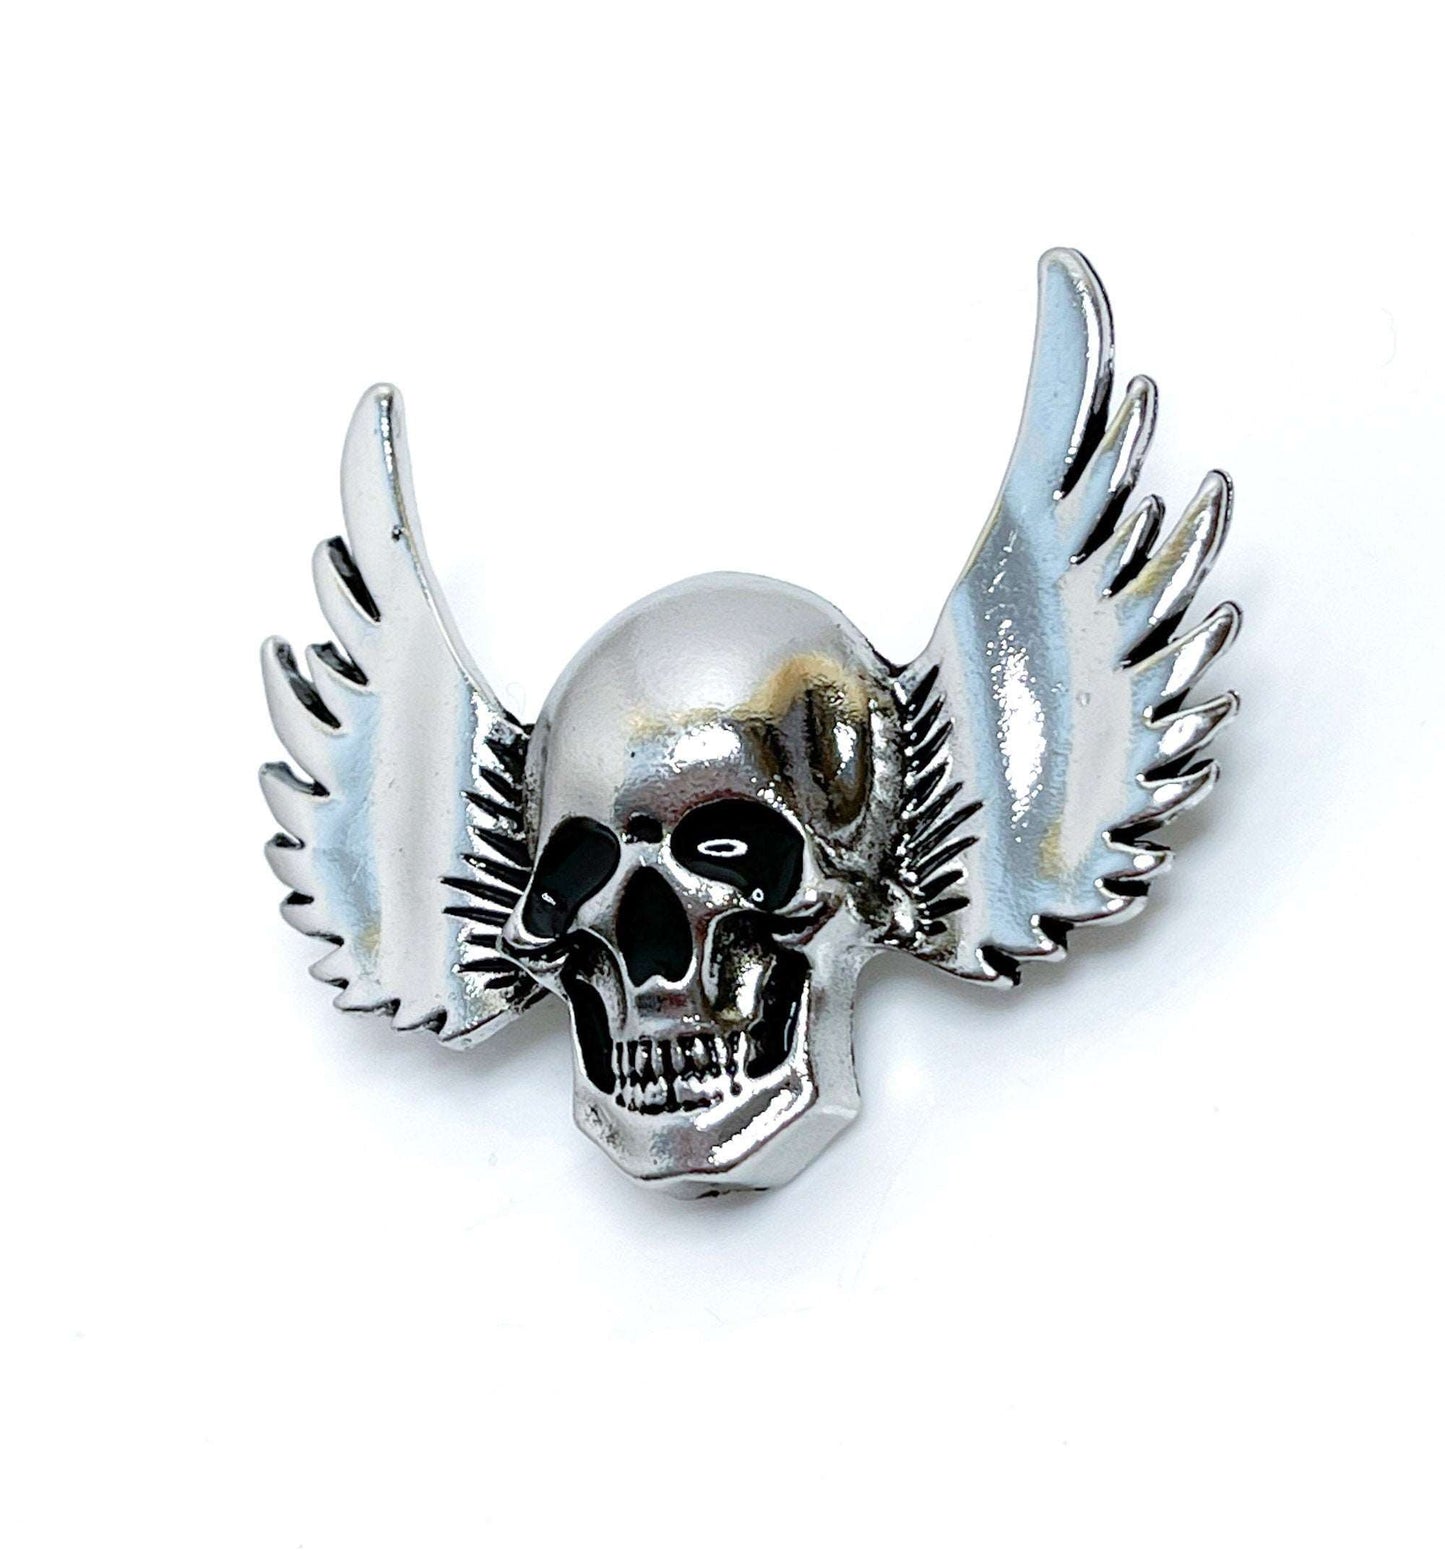 Antique Silver Winged Skull Brooch, Gothic Brooch, Unisex Jewellery, Bikers Pin, Rockers Pin, Winged Skull Pin